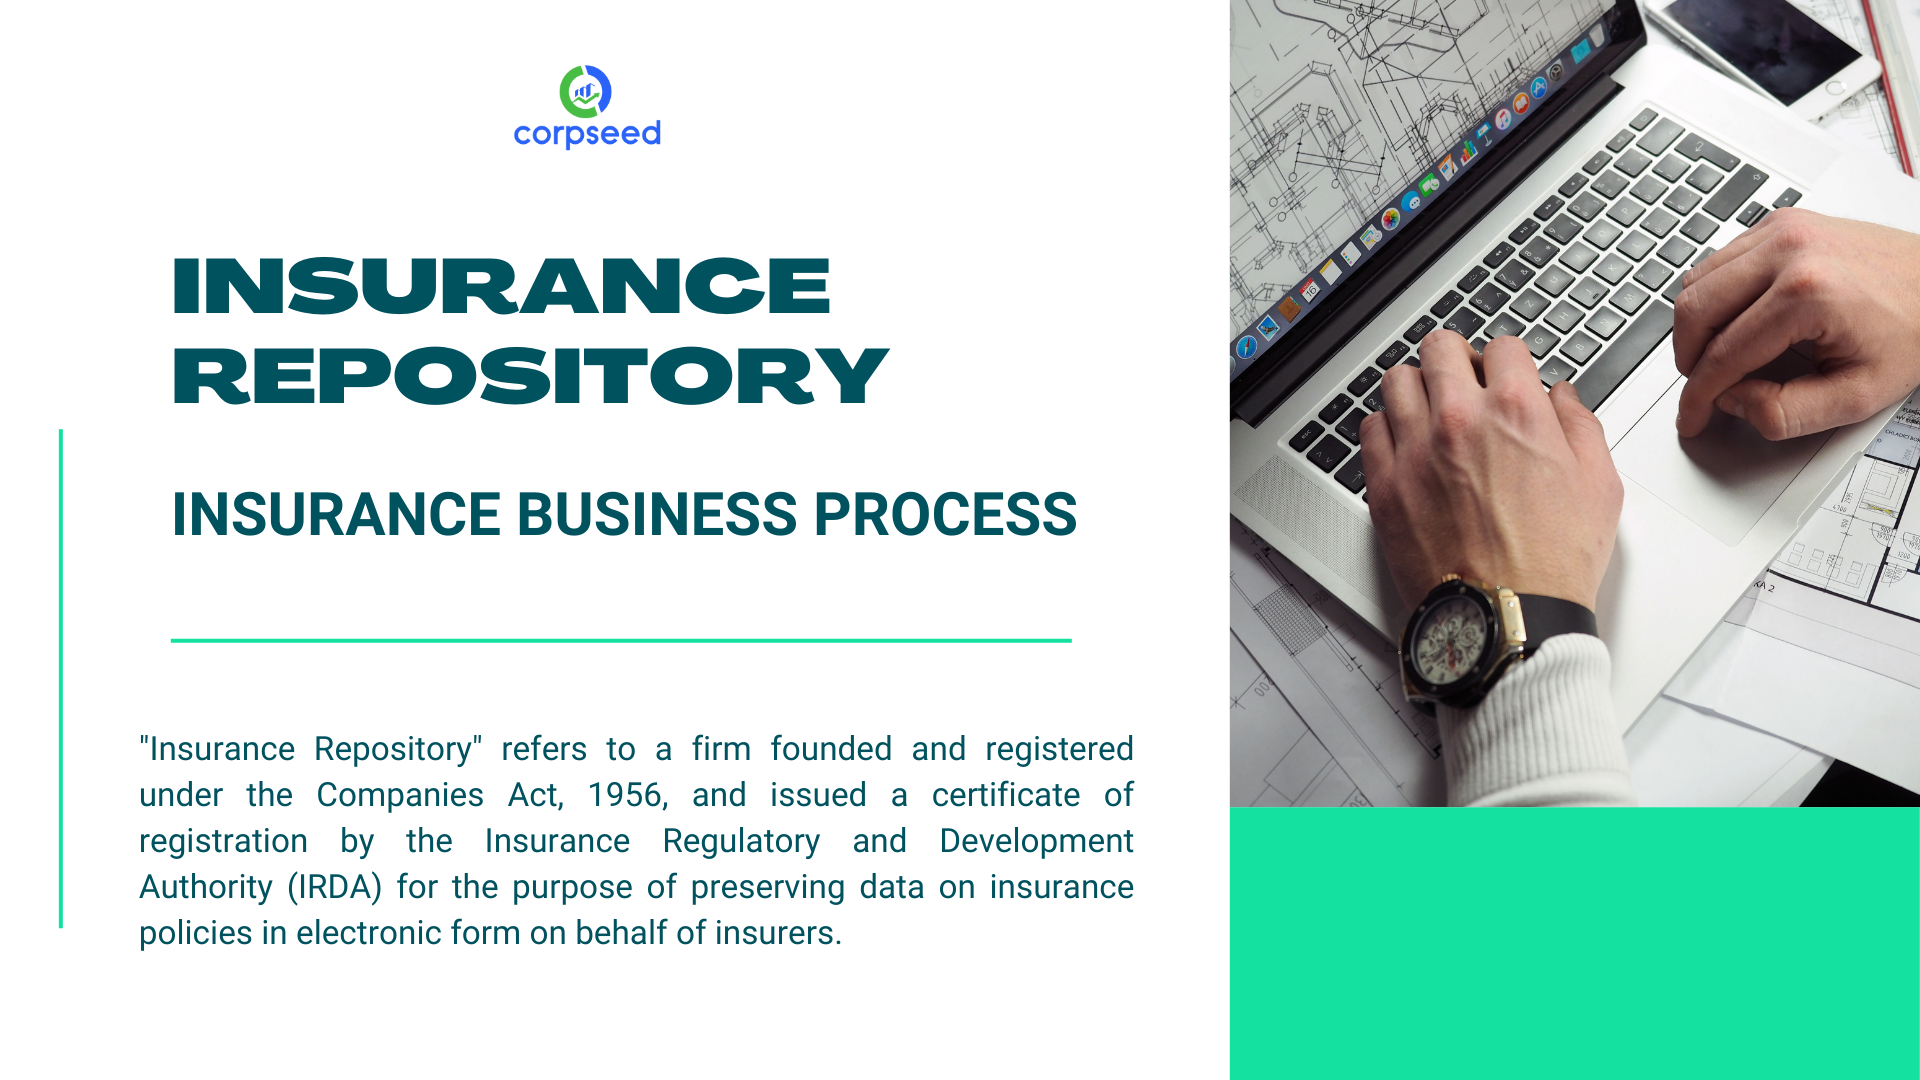 insurance-repository-and-insurance-business-process-corpseed.png